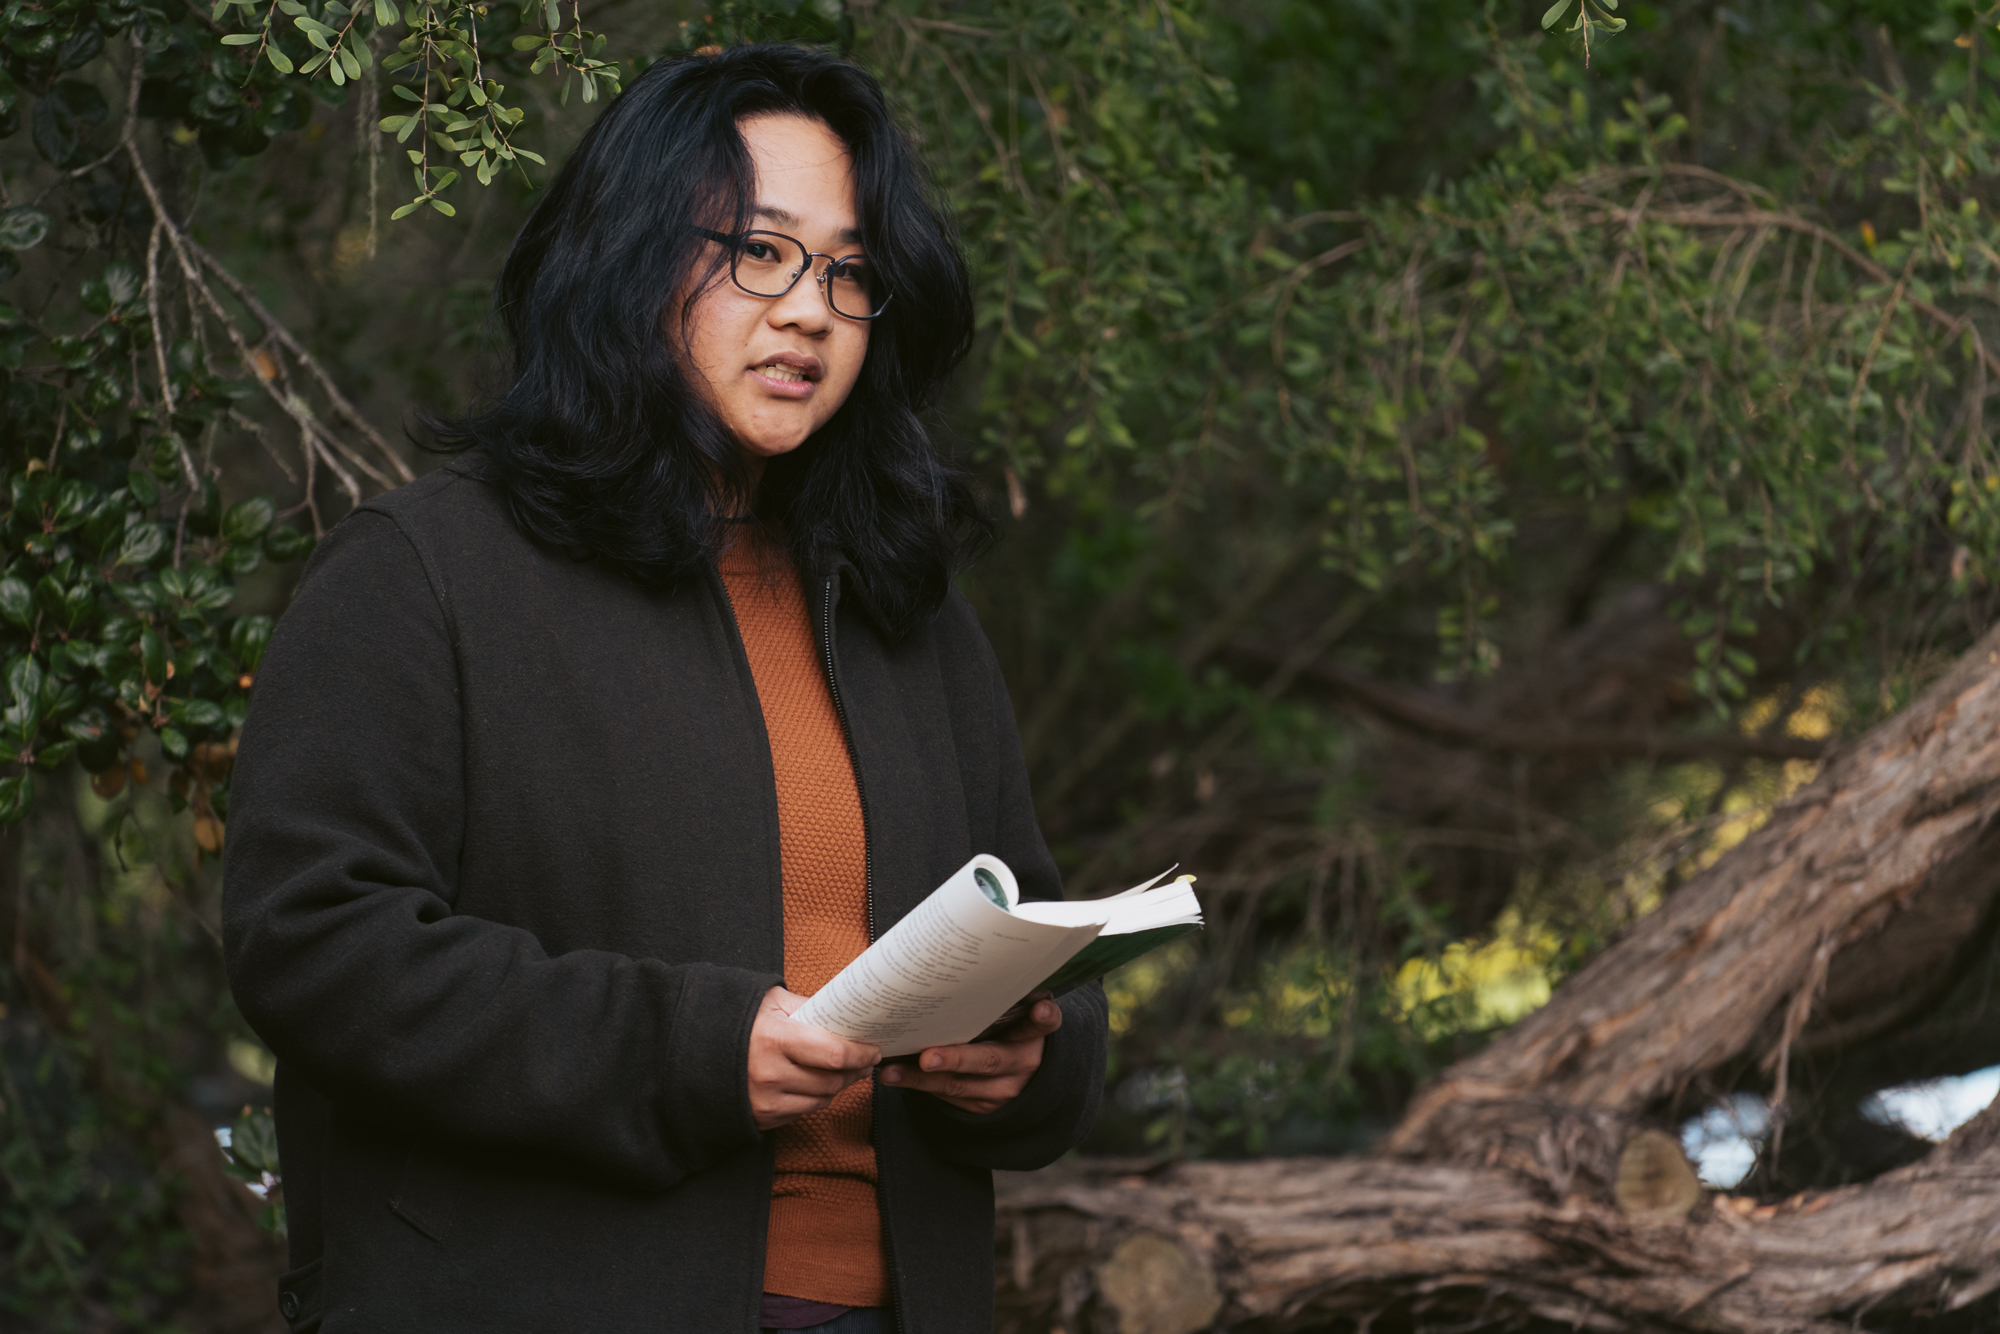 Person with shoulder-length black hair and glasses reads from paperback in wooded area